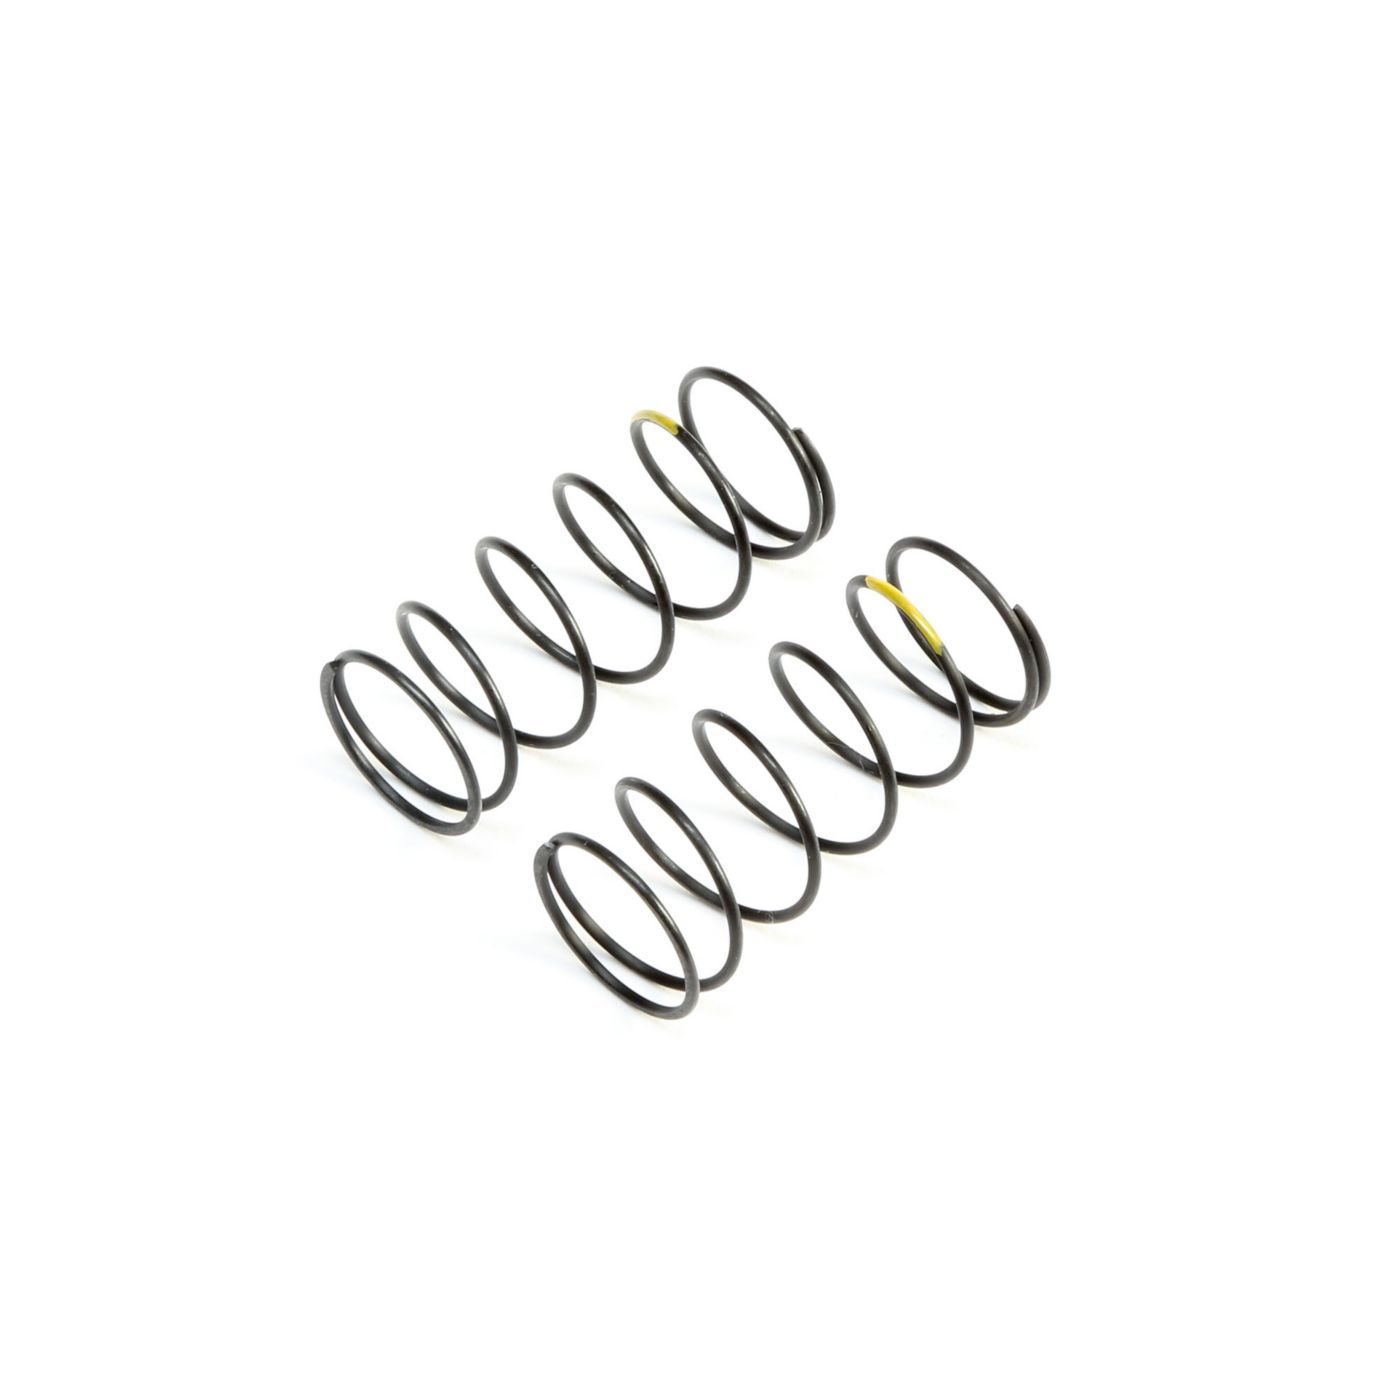 TLR Yellow Front Springs Low Frequency 12mm (2) TLR233053